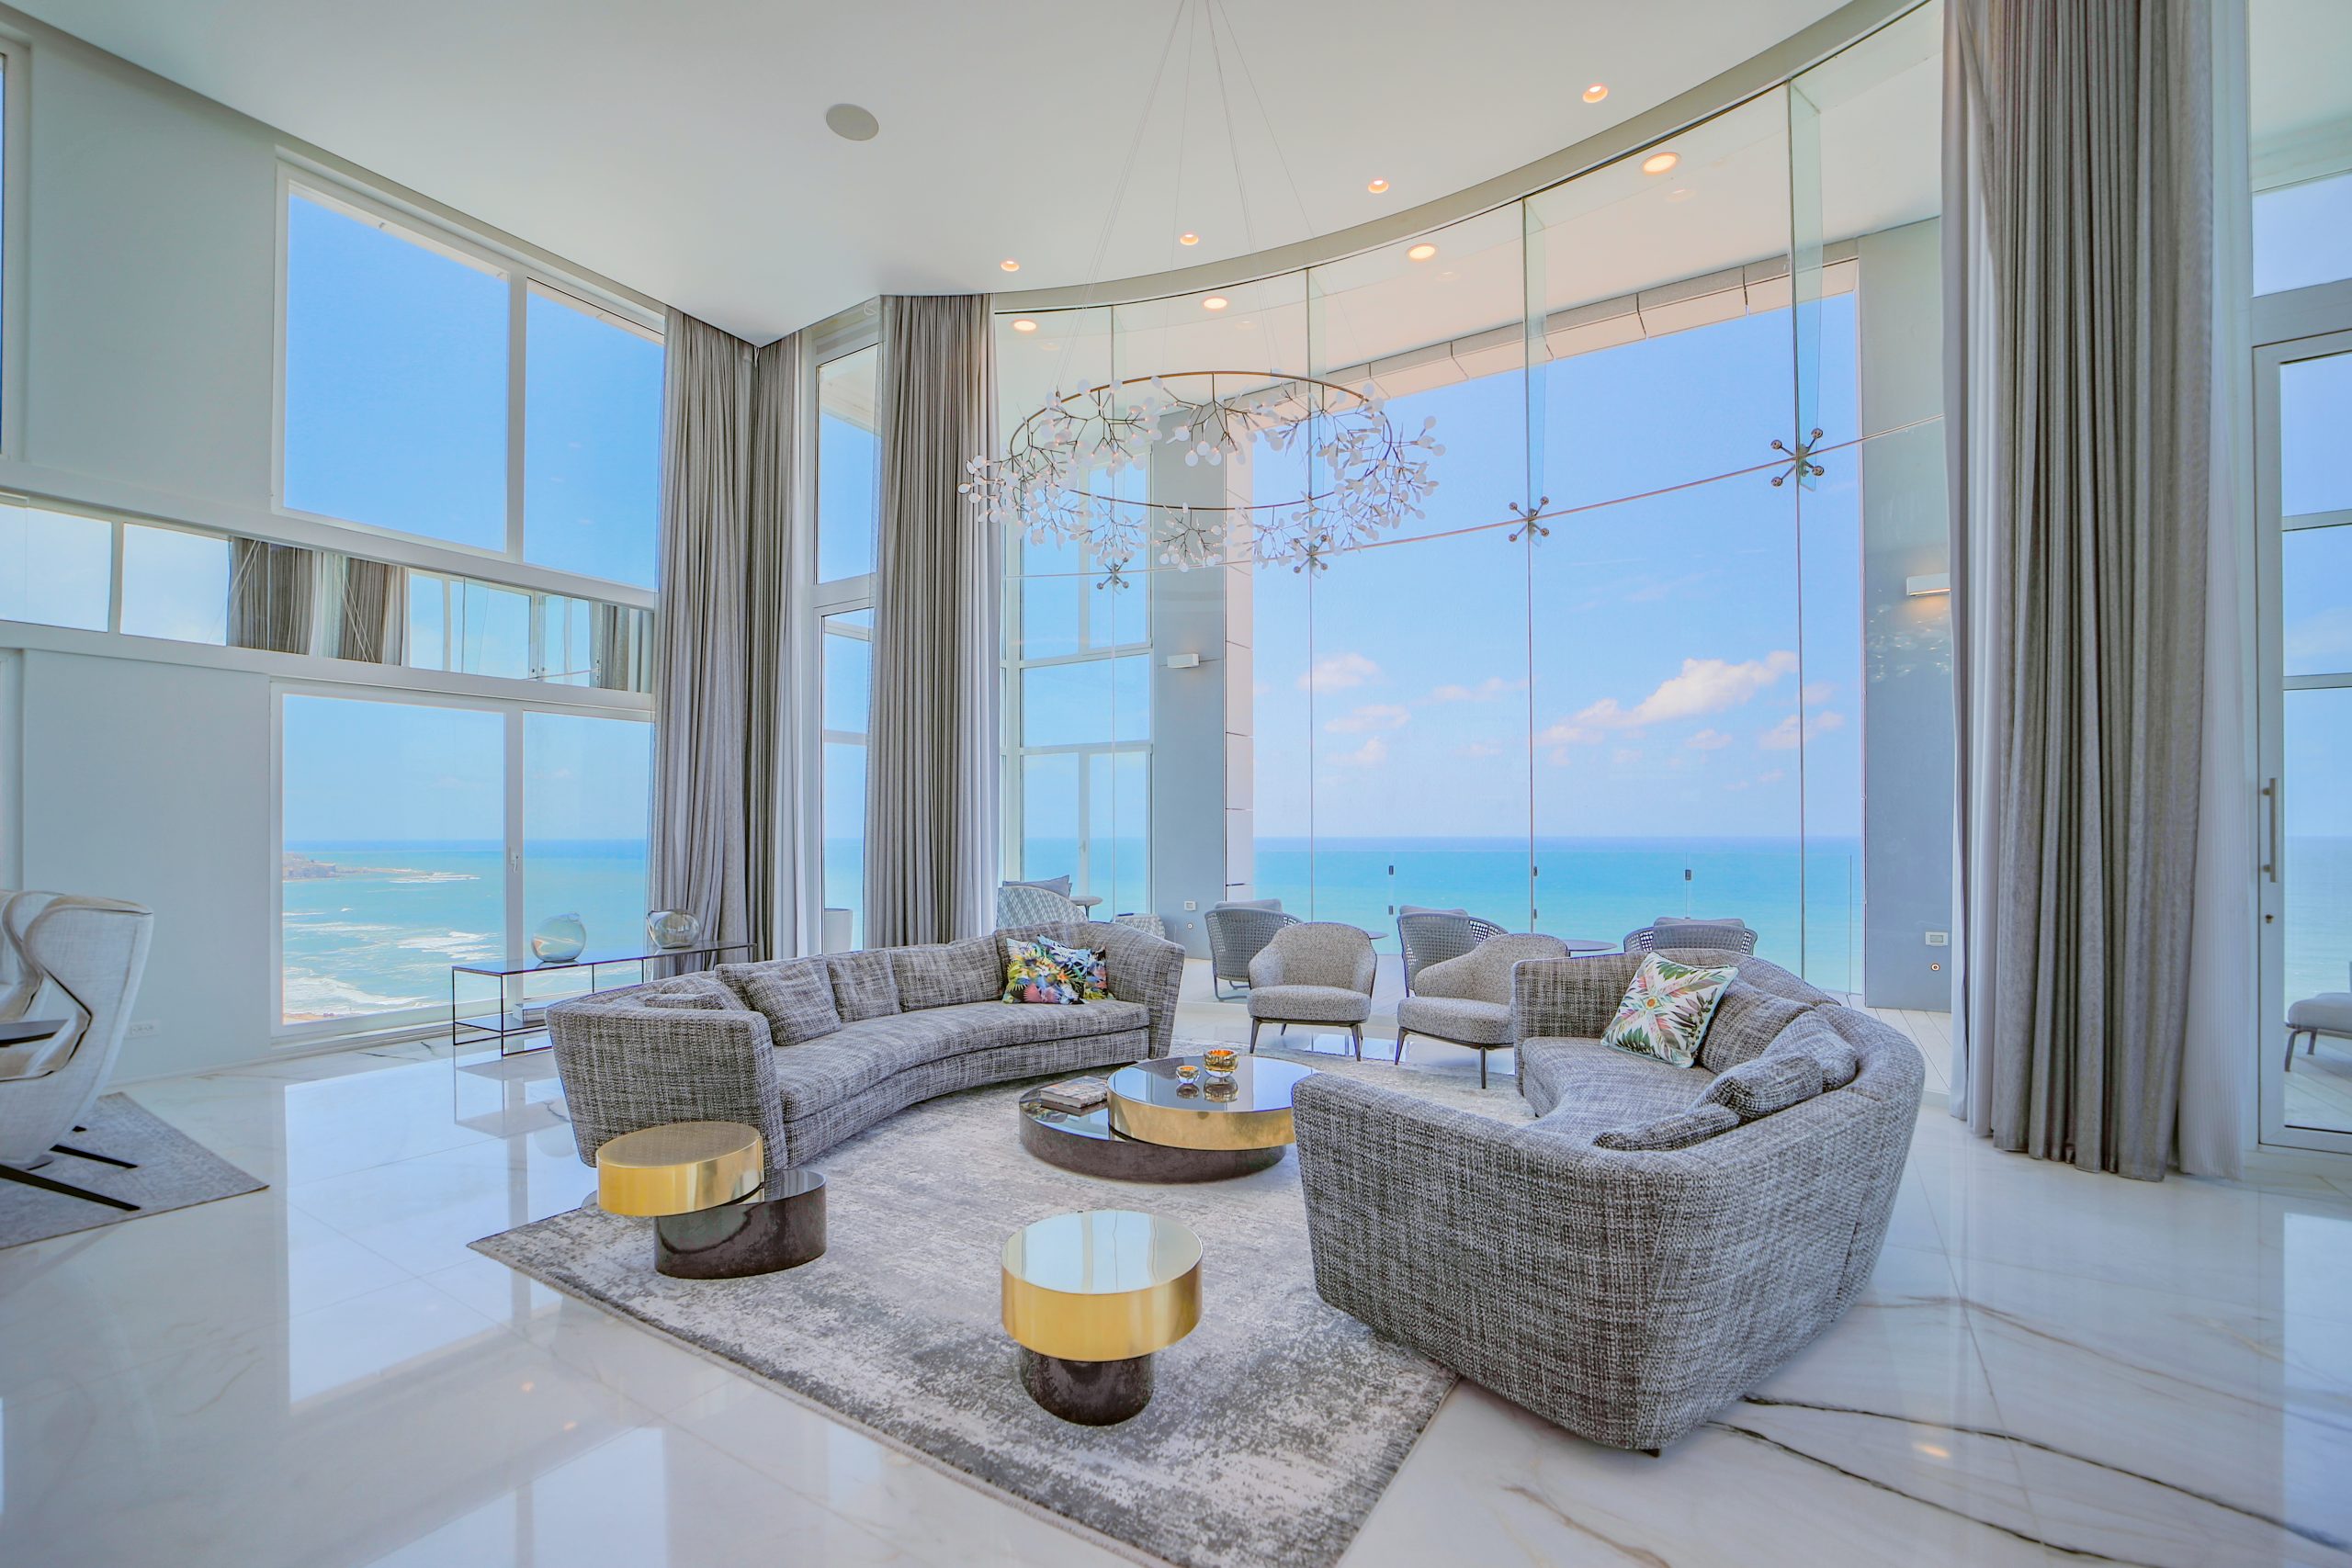 A living room with large windows overlooking the ocean.